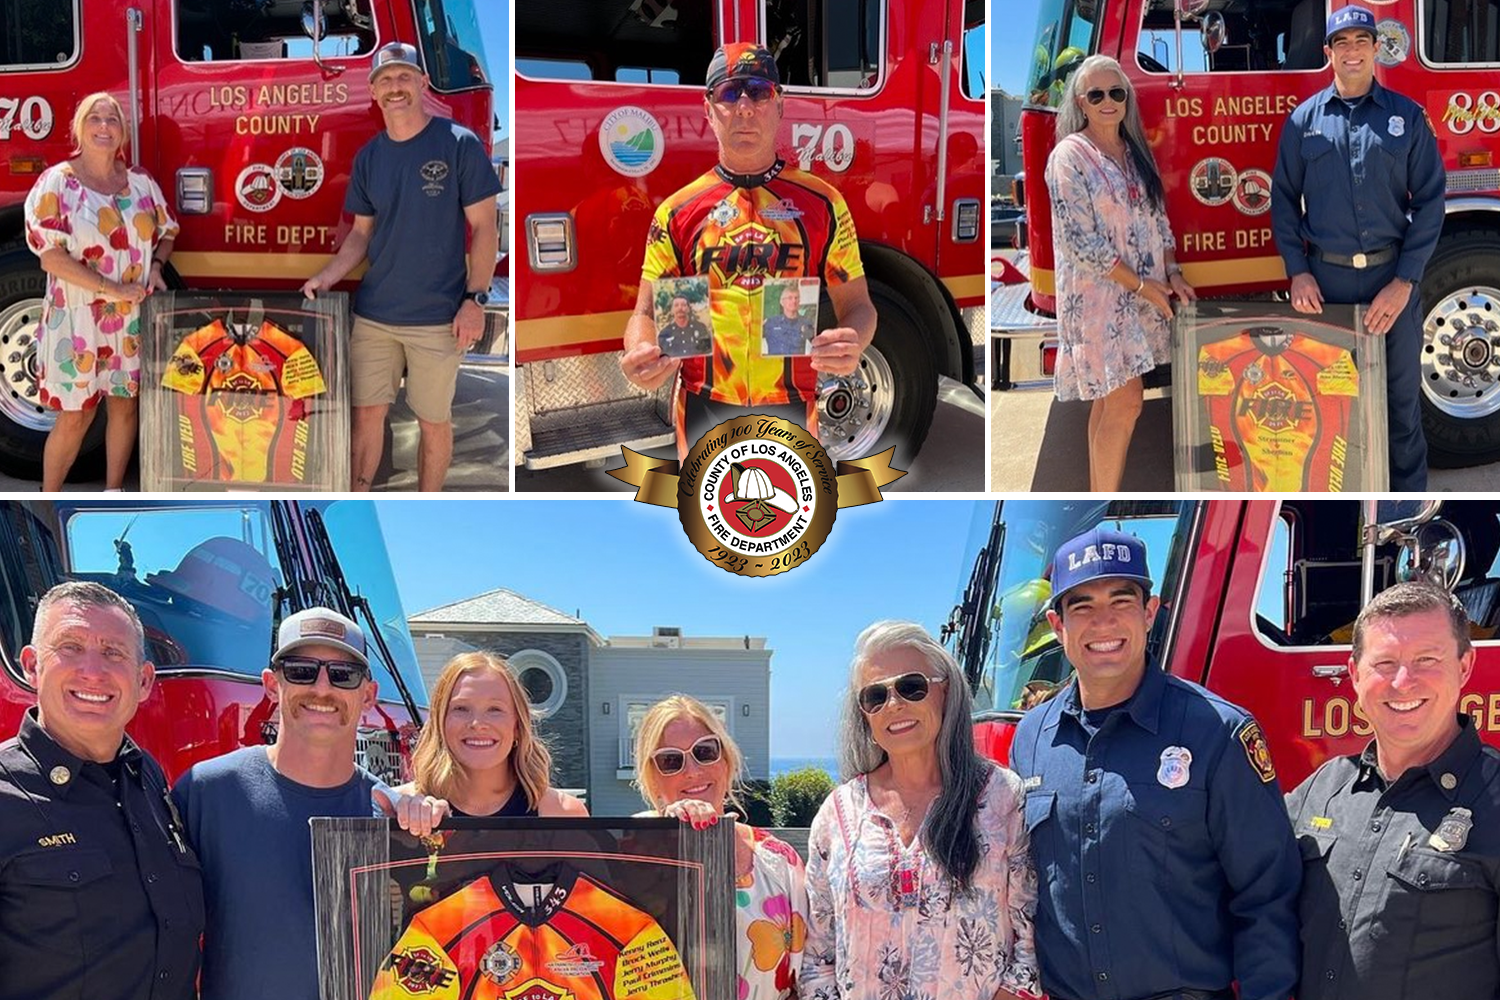 In honor of fallen County of Los Angeles Fire Captains Ken Renz and Ed Dahlen’s legacy, the Fire Velo Cycling Club rode over 500-miles from San Francisco to Santa Monica Pier in Los Angeles.